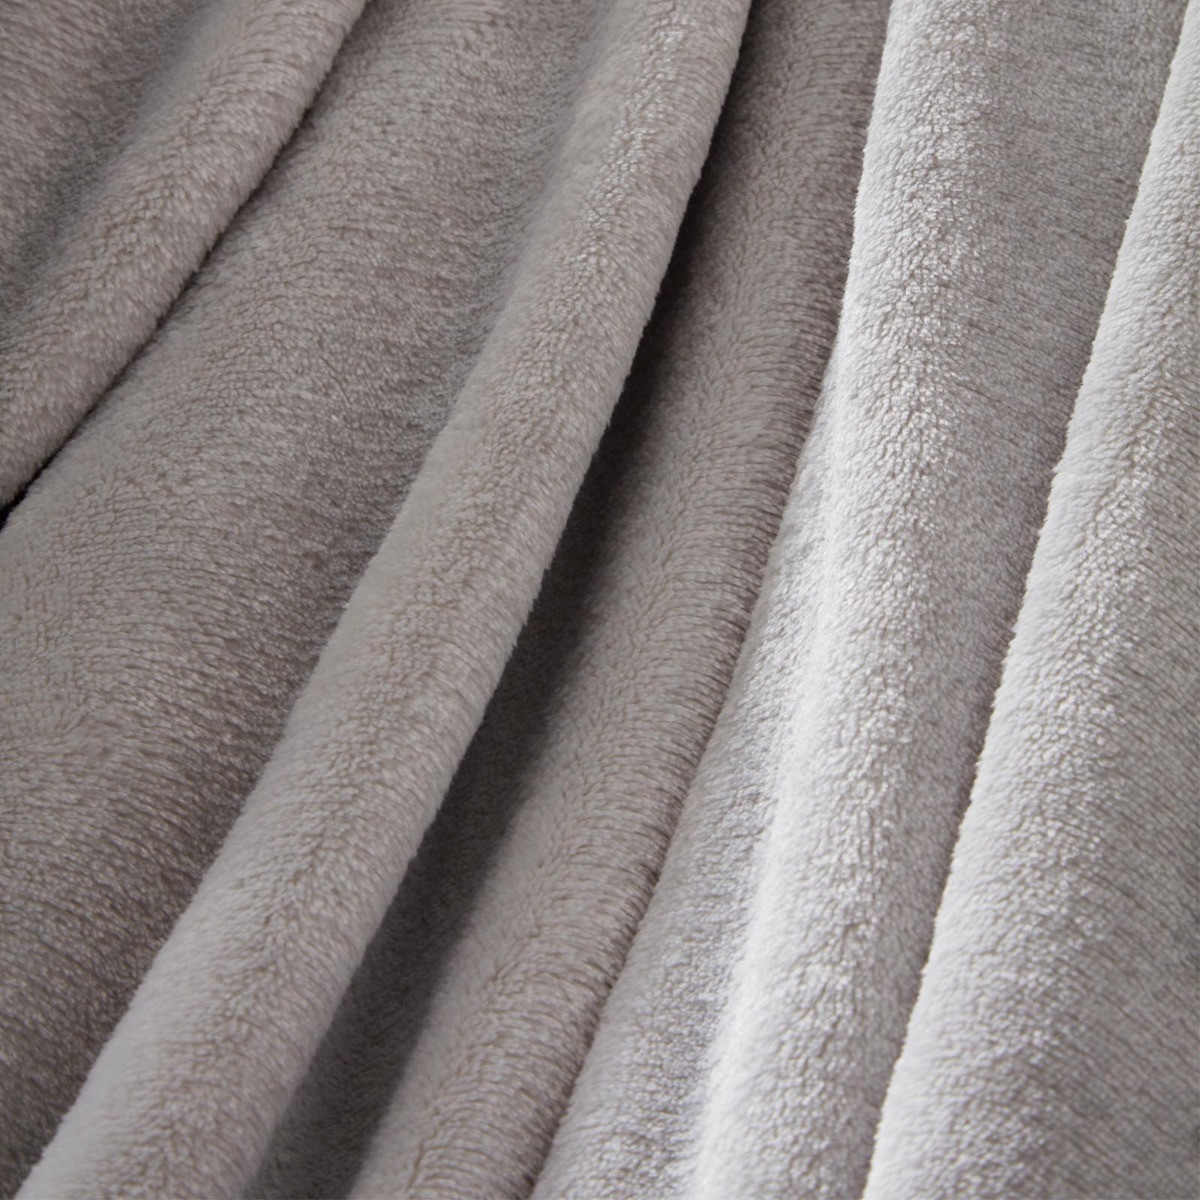 Brentfords by OHS Supersoft Throw Blanket, Silver Grey - 50 x 60 inches>